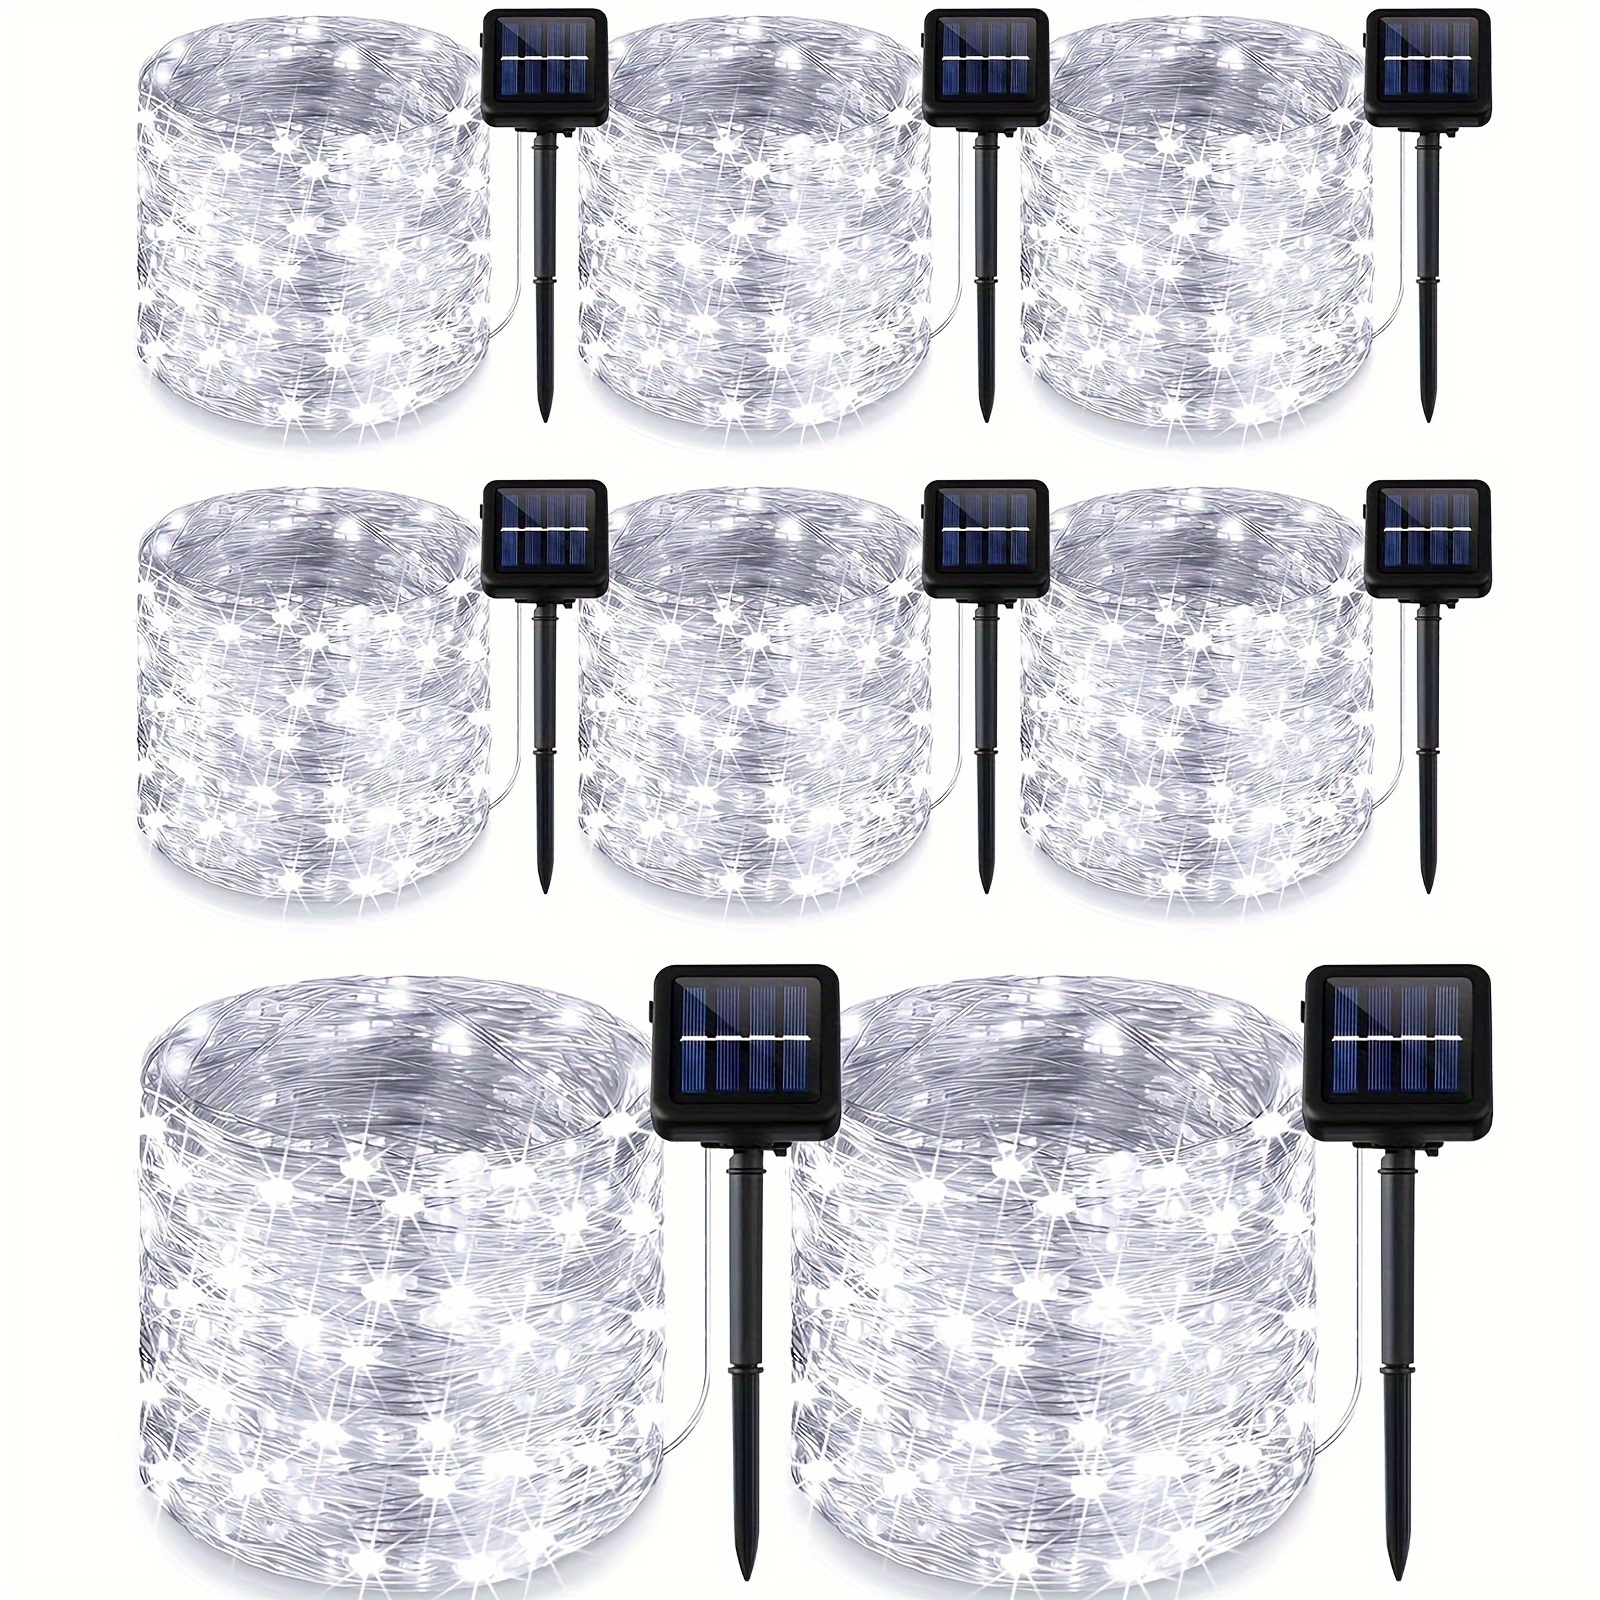 

8-pack Solar Fairy String Lights, Total 184ft 400 Led Outdoor Twinkle Lights Ip65 Waterproof, 8 Lighting Modes, Multicolor Copper Wire Lights For Deck Backyard Tree Garden Fence Pool Party Decorations